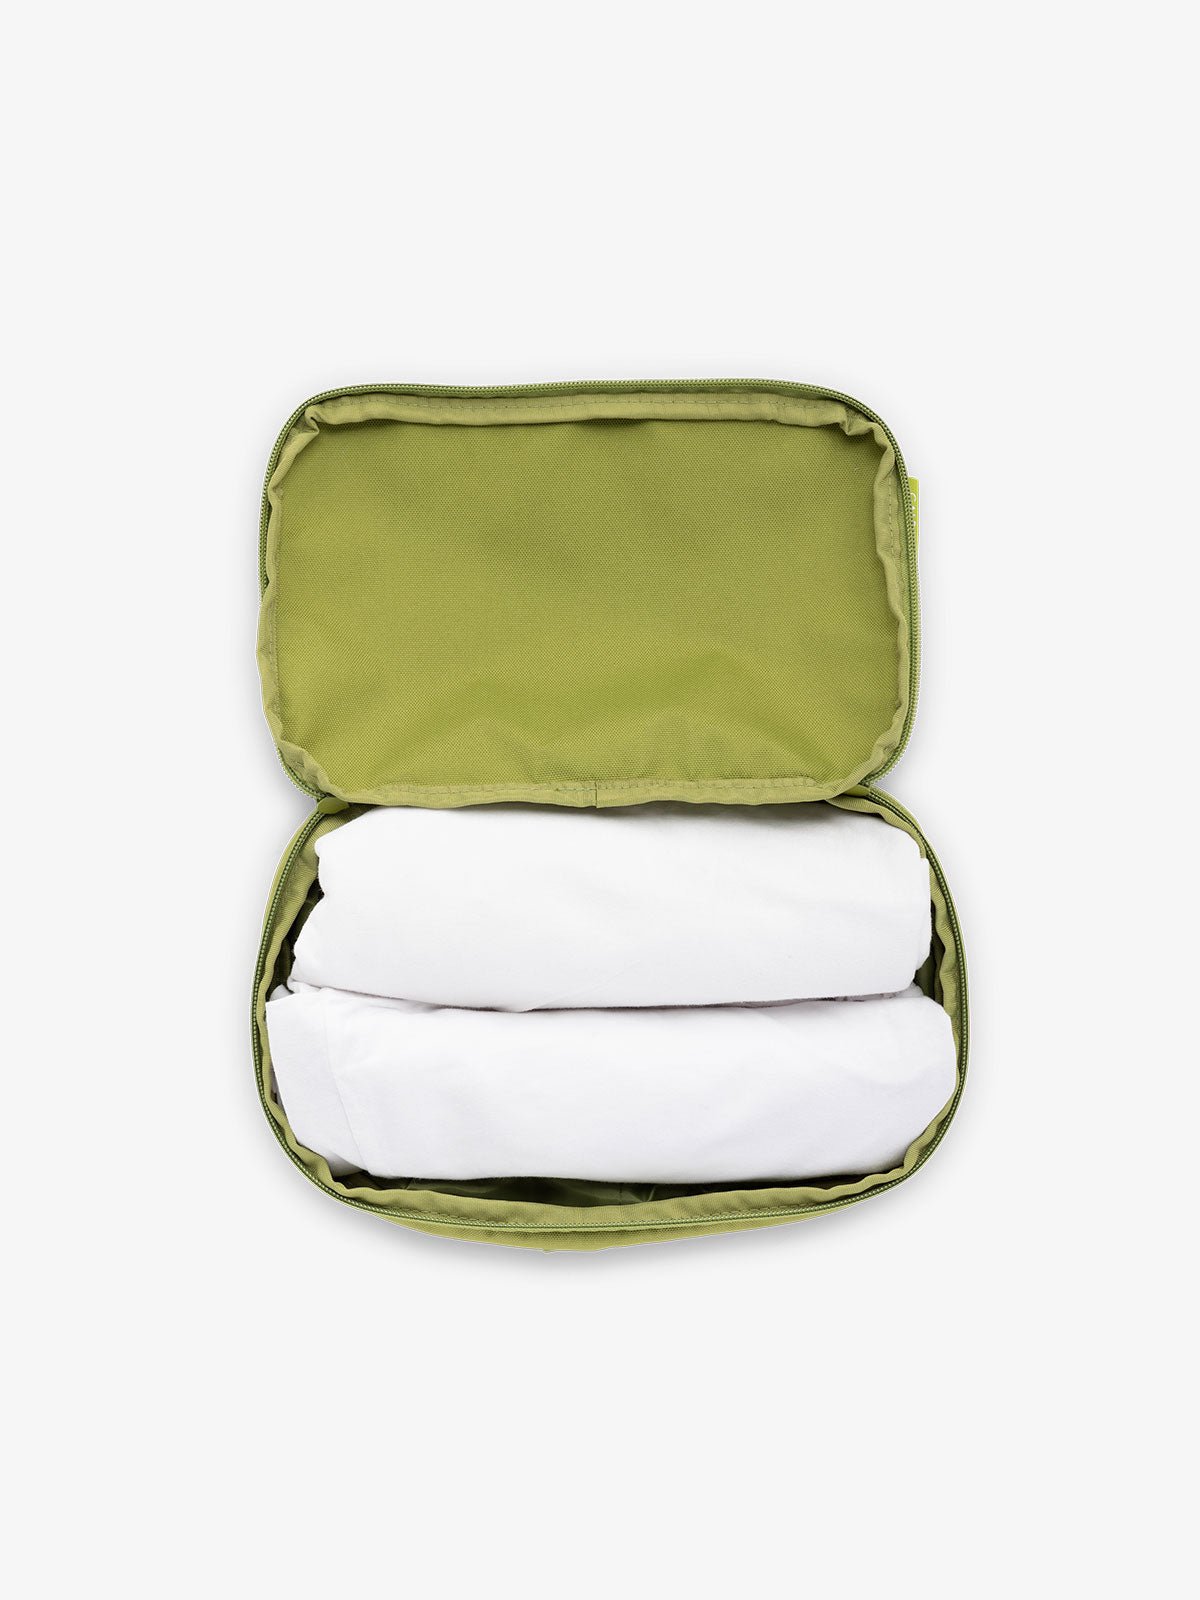 CALPAK small packing cubes for travel made with durable material in palm